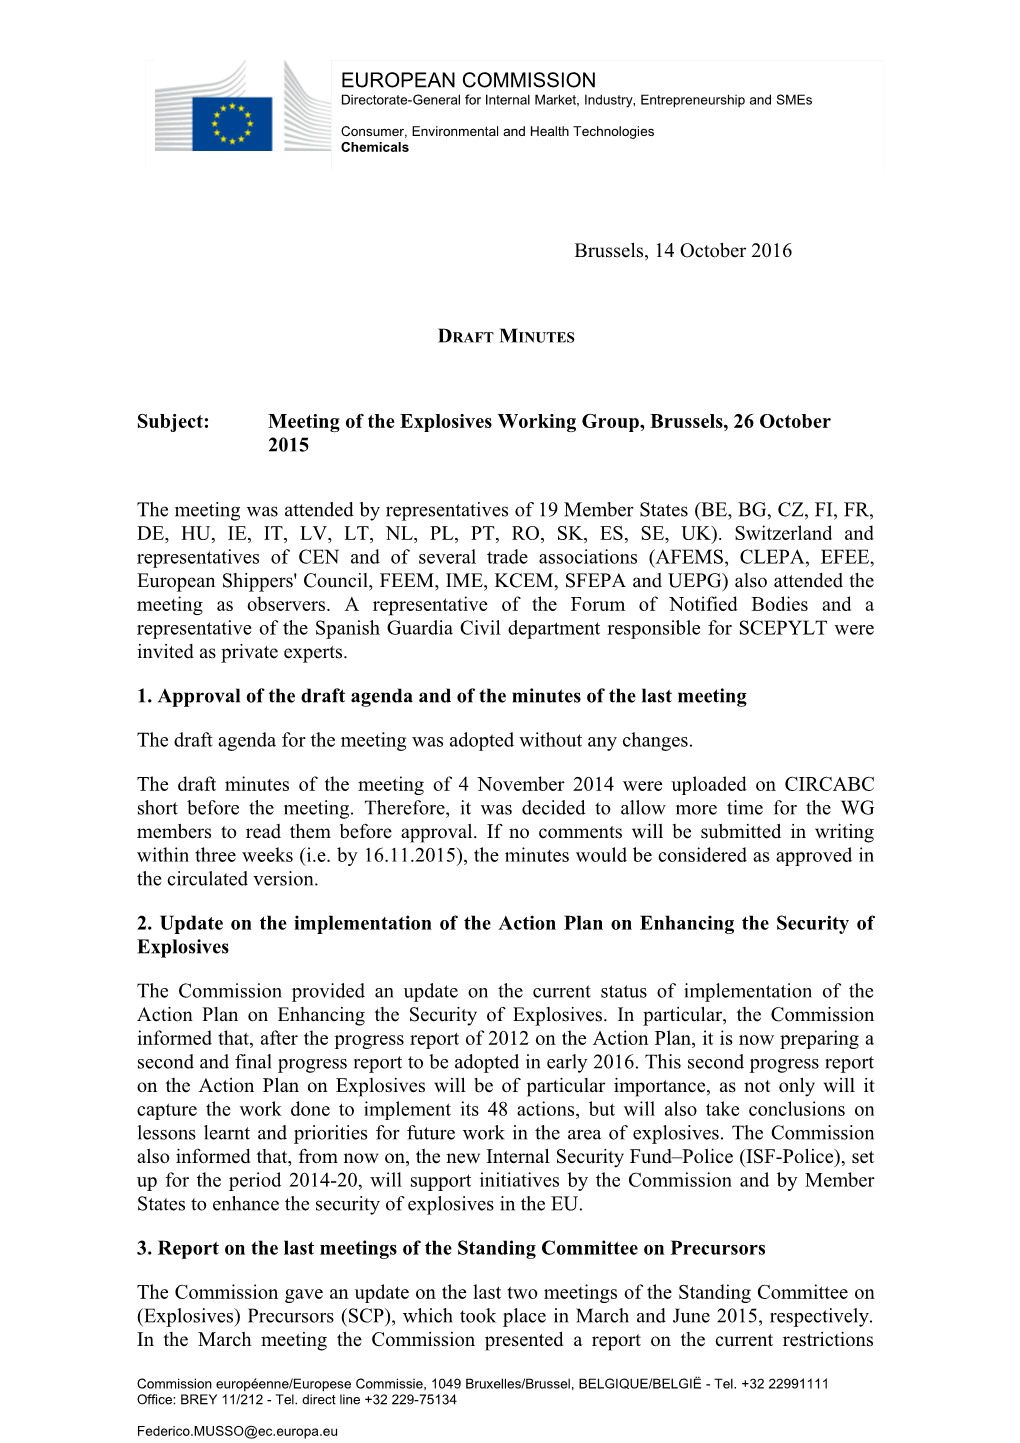 Subject:Meeting of the Explosives Working Group, Brussels, 26 October 2015